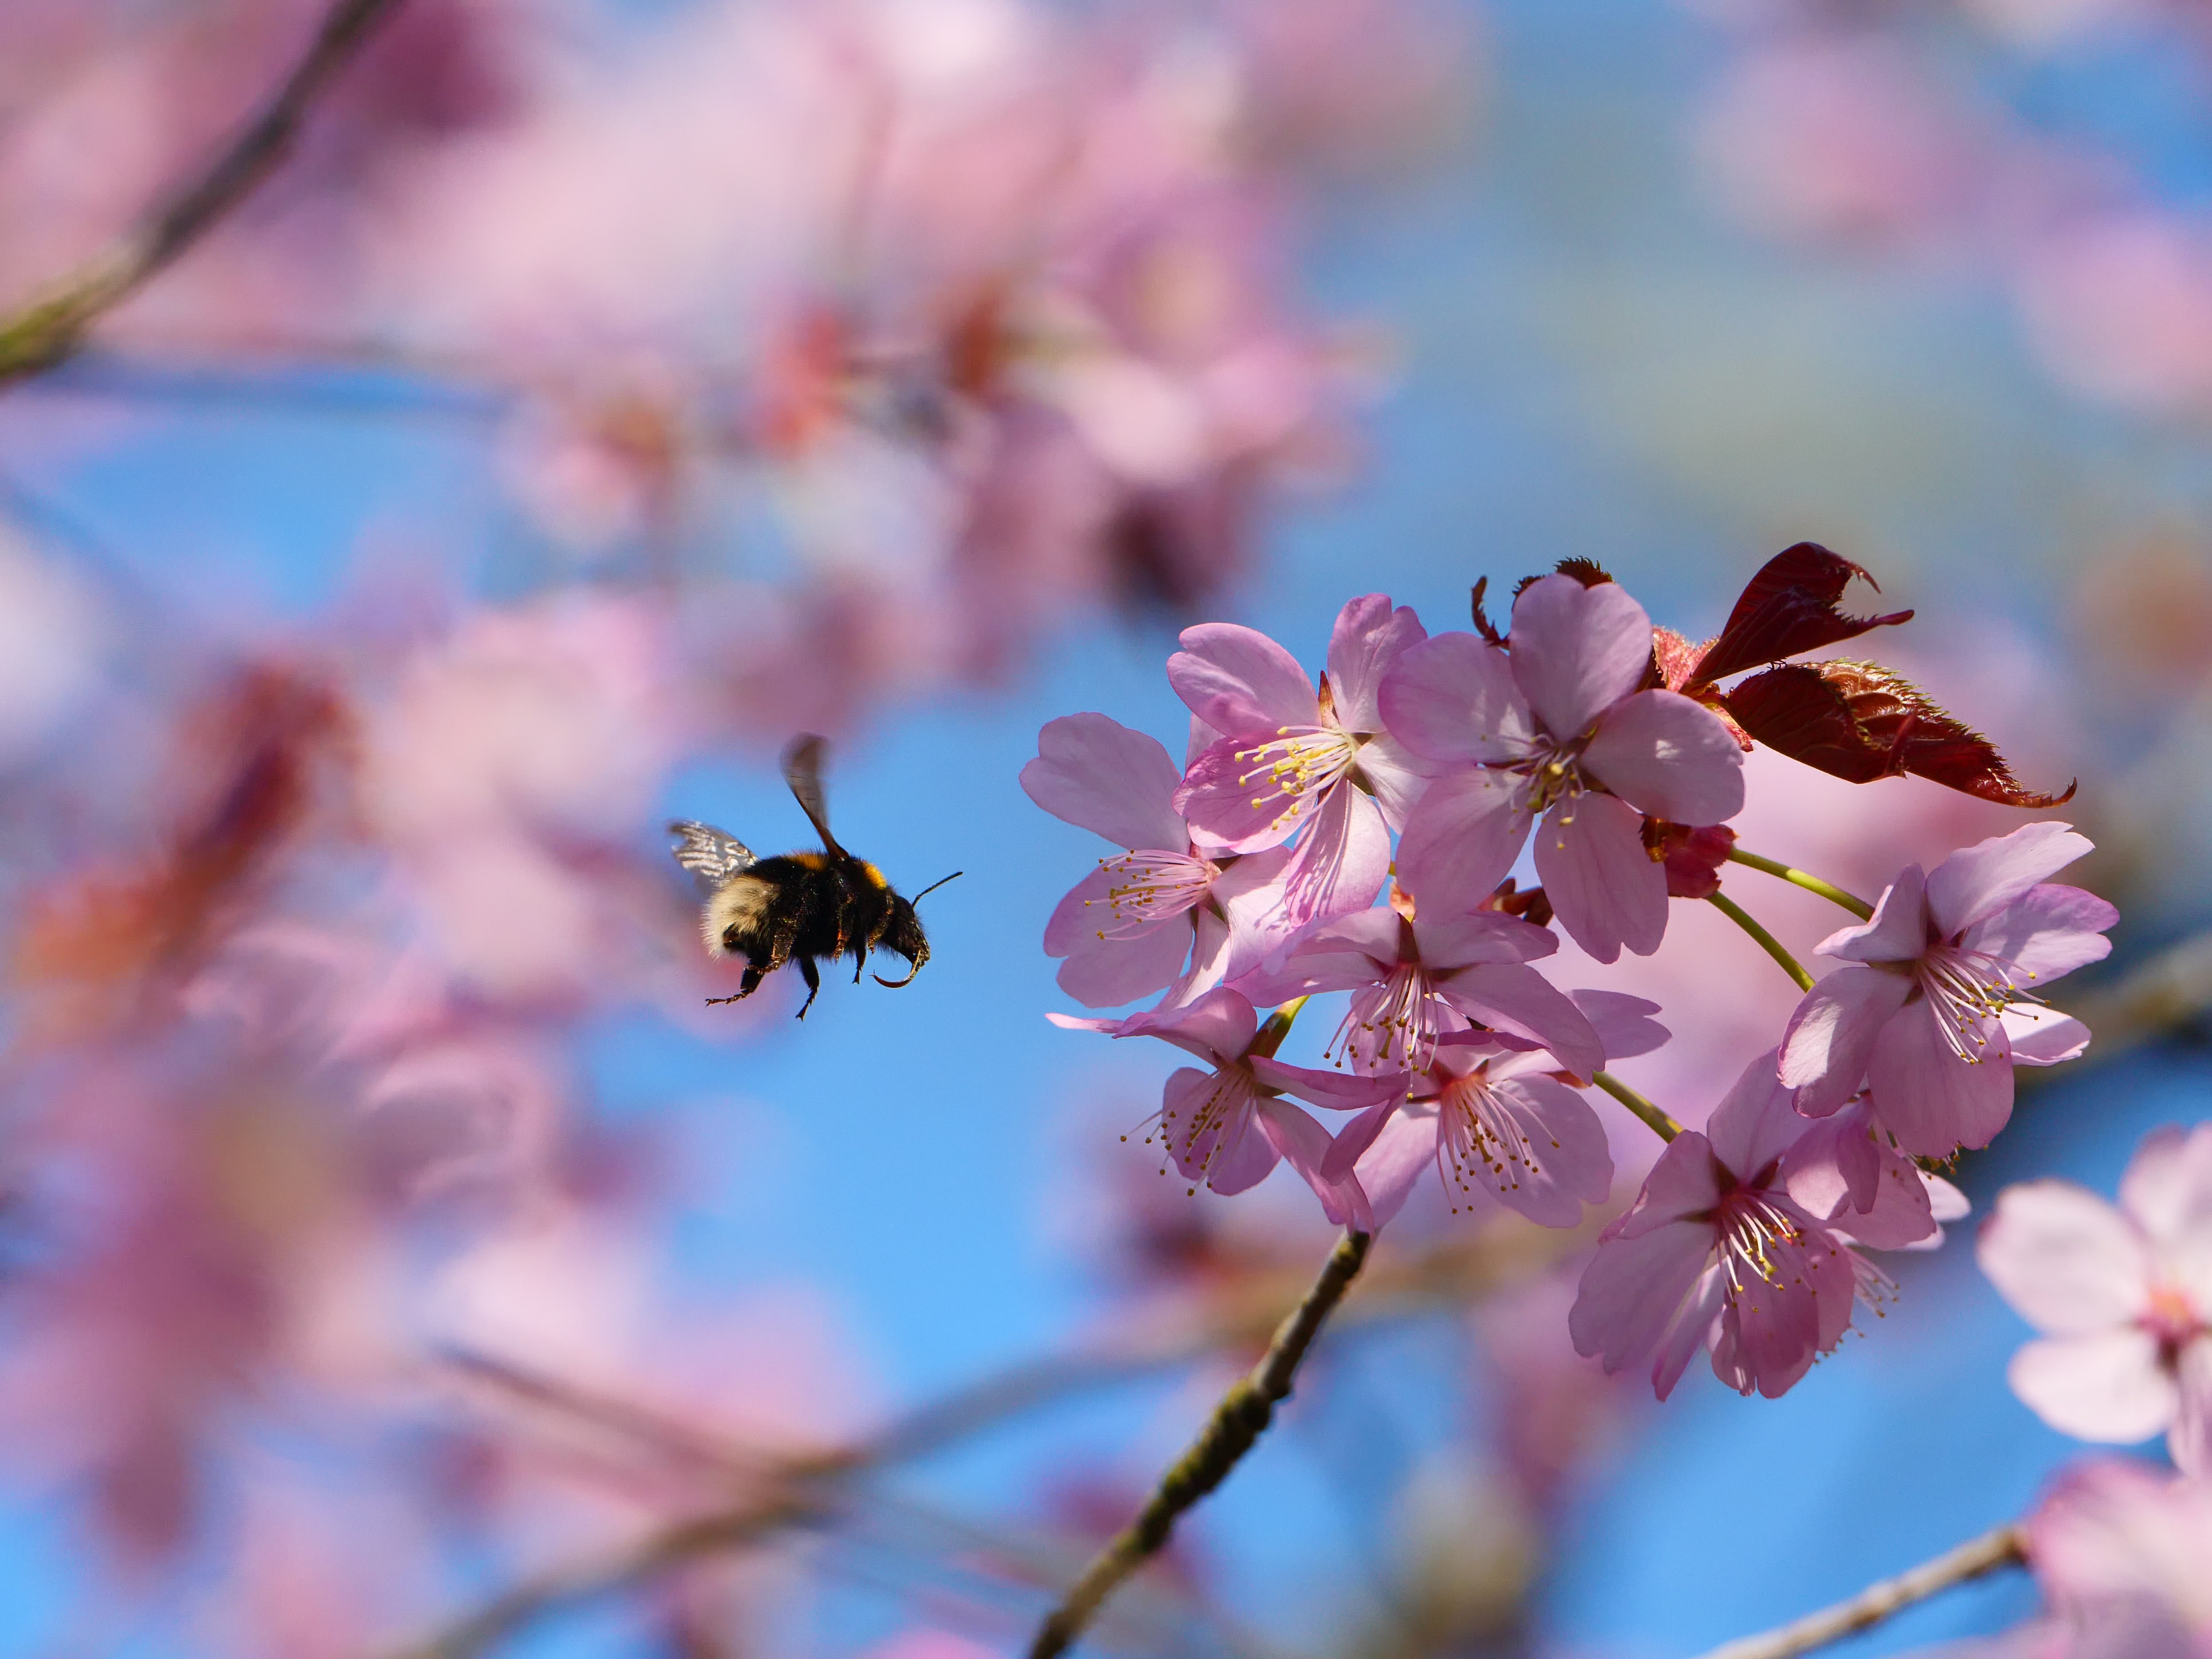 People urged to share ‘awesome spectacle of blossom’ as spring arrives